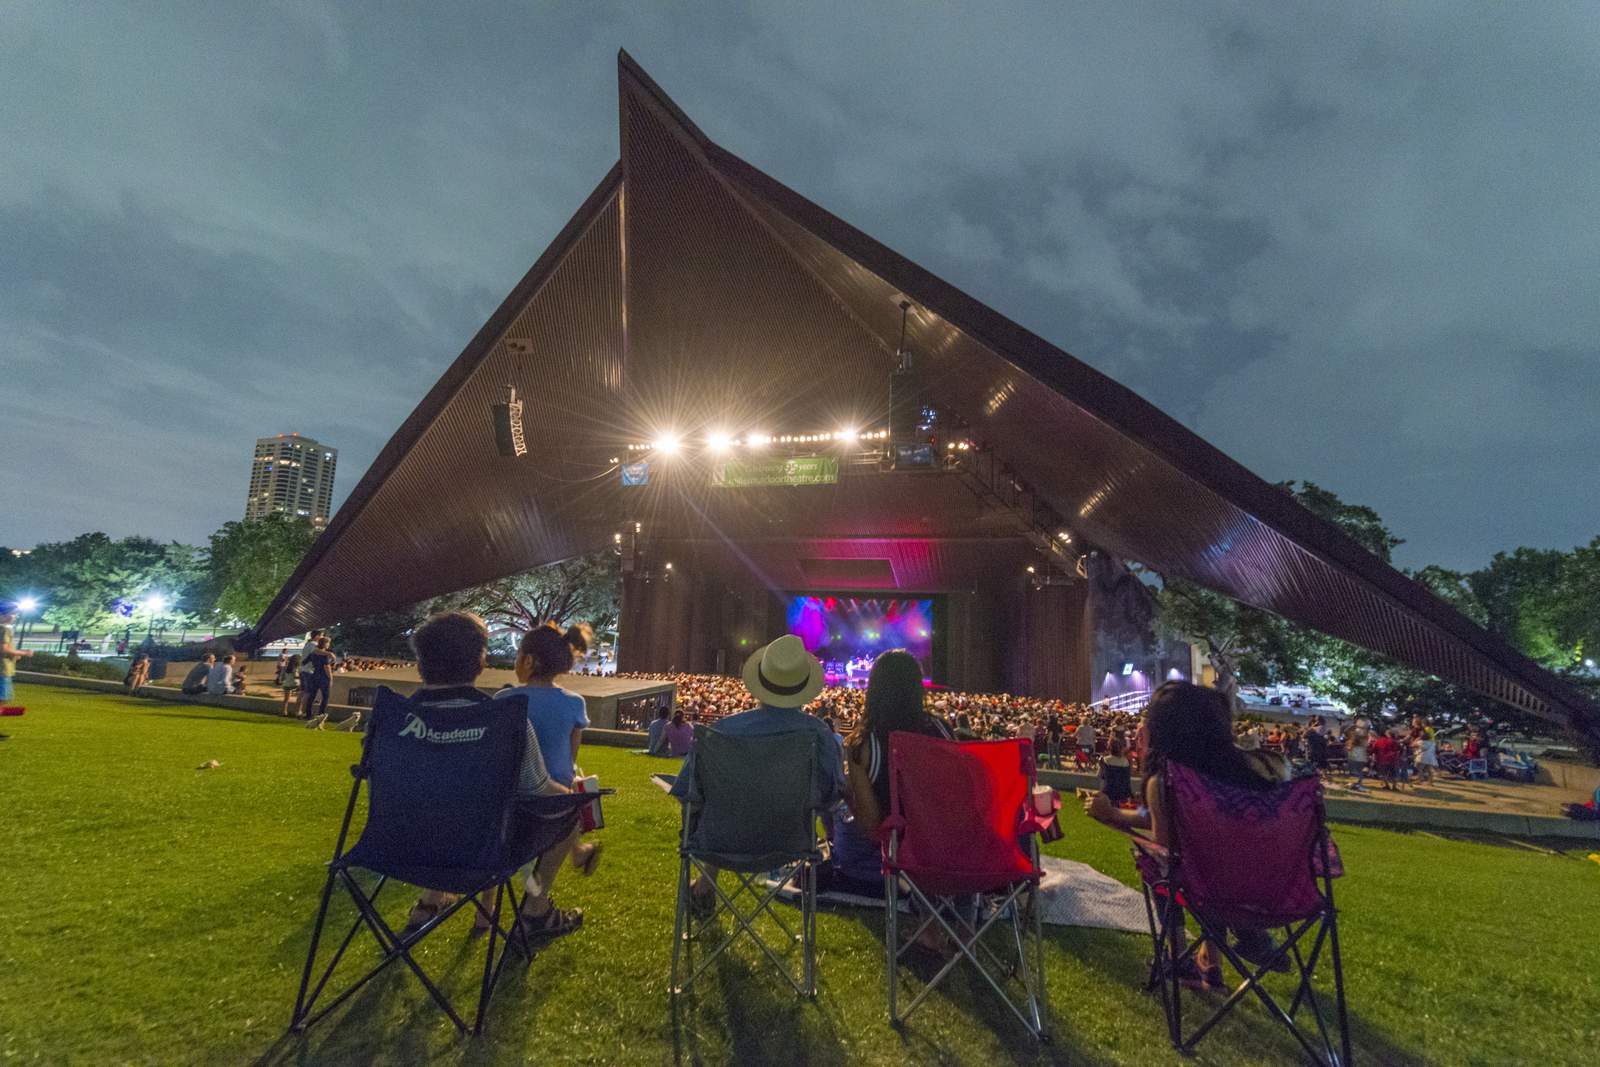 Miller Outdoor Theatre reopening May 1: What you need to know